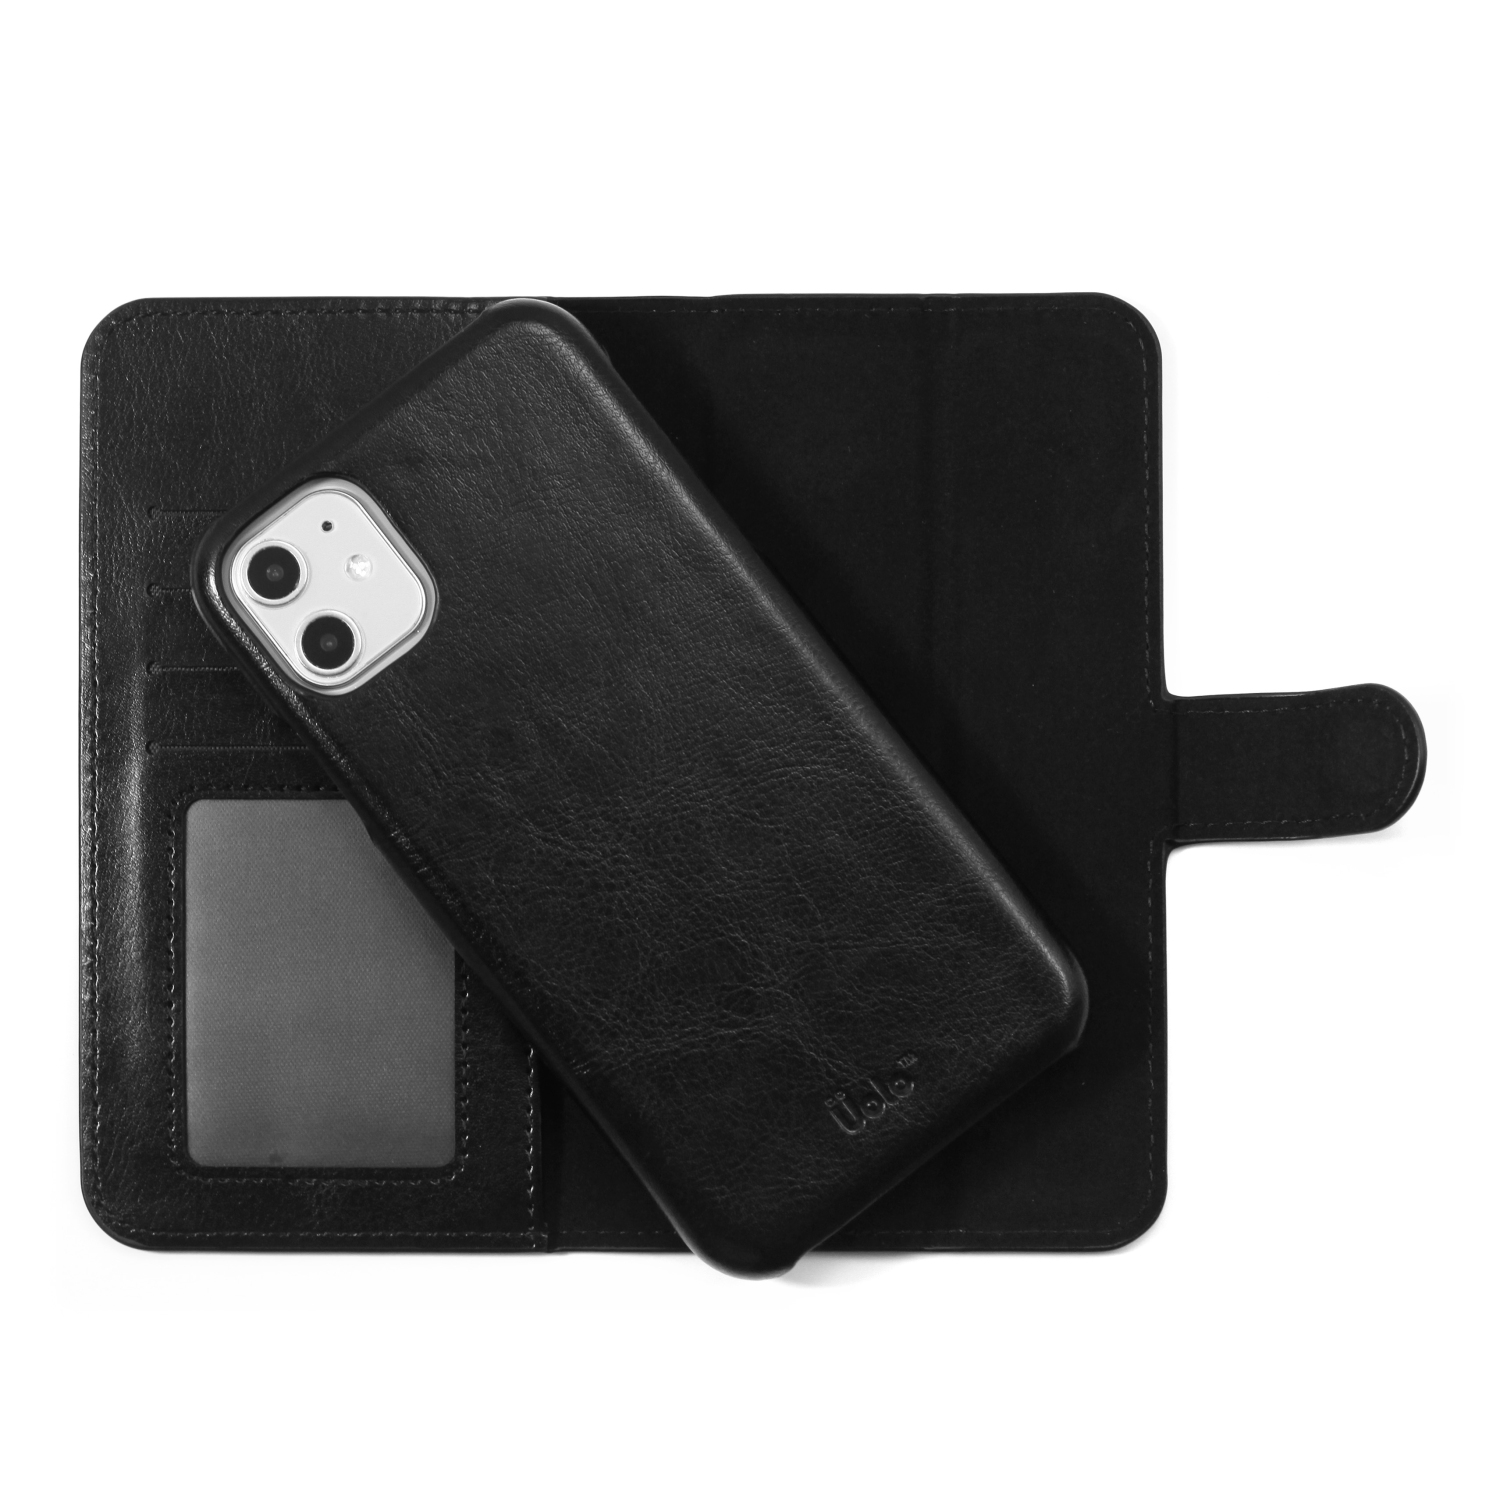 Monochrome Folio Credit Card Phone Case for iPhone iPhone Credit Card Phone Case Folio Phone Case iPhone Wallet Phone Case